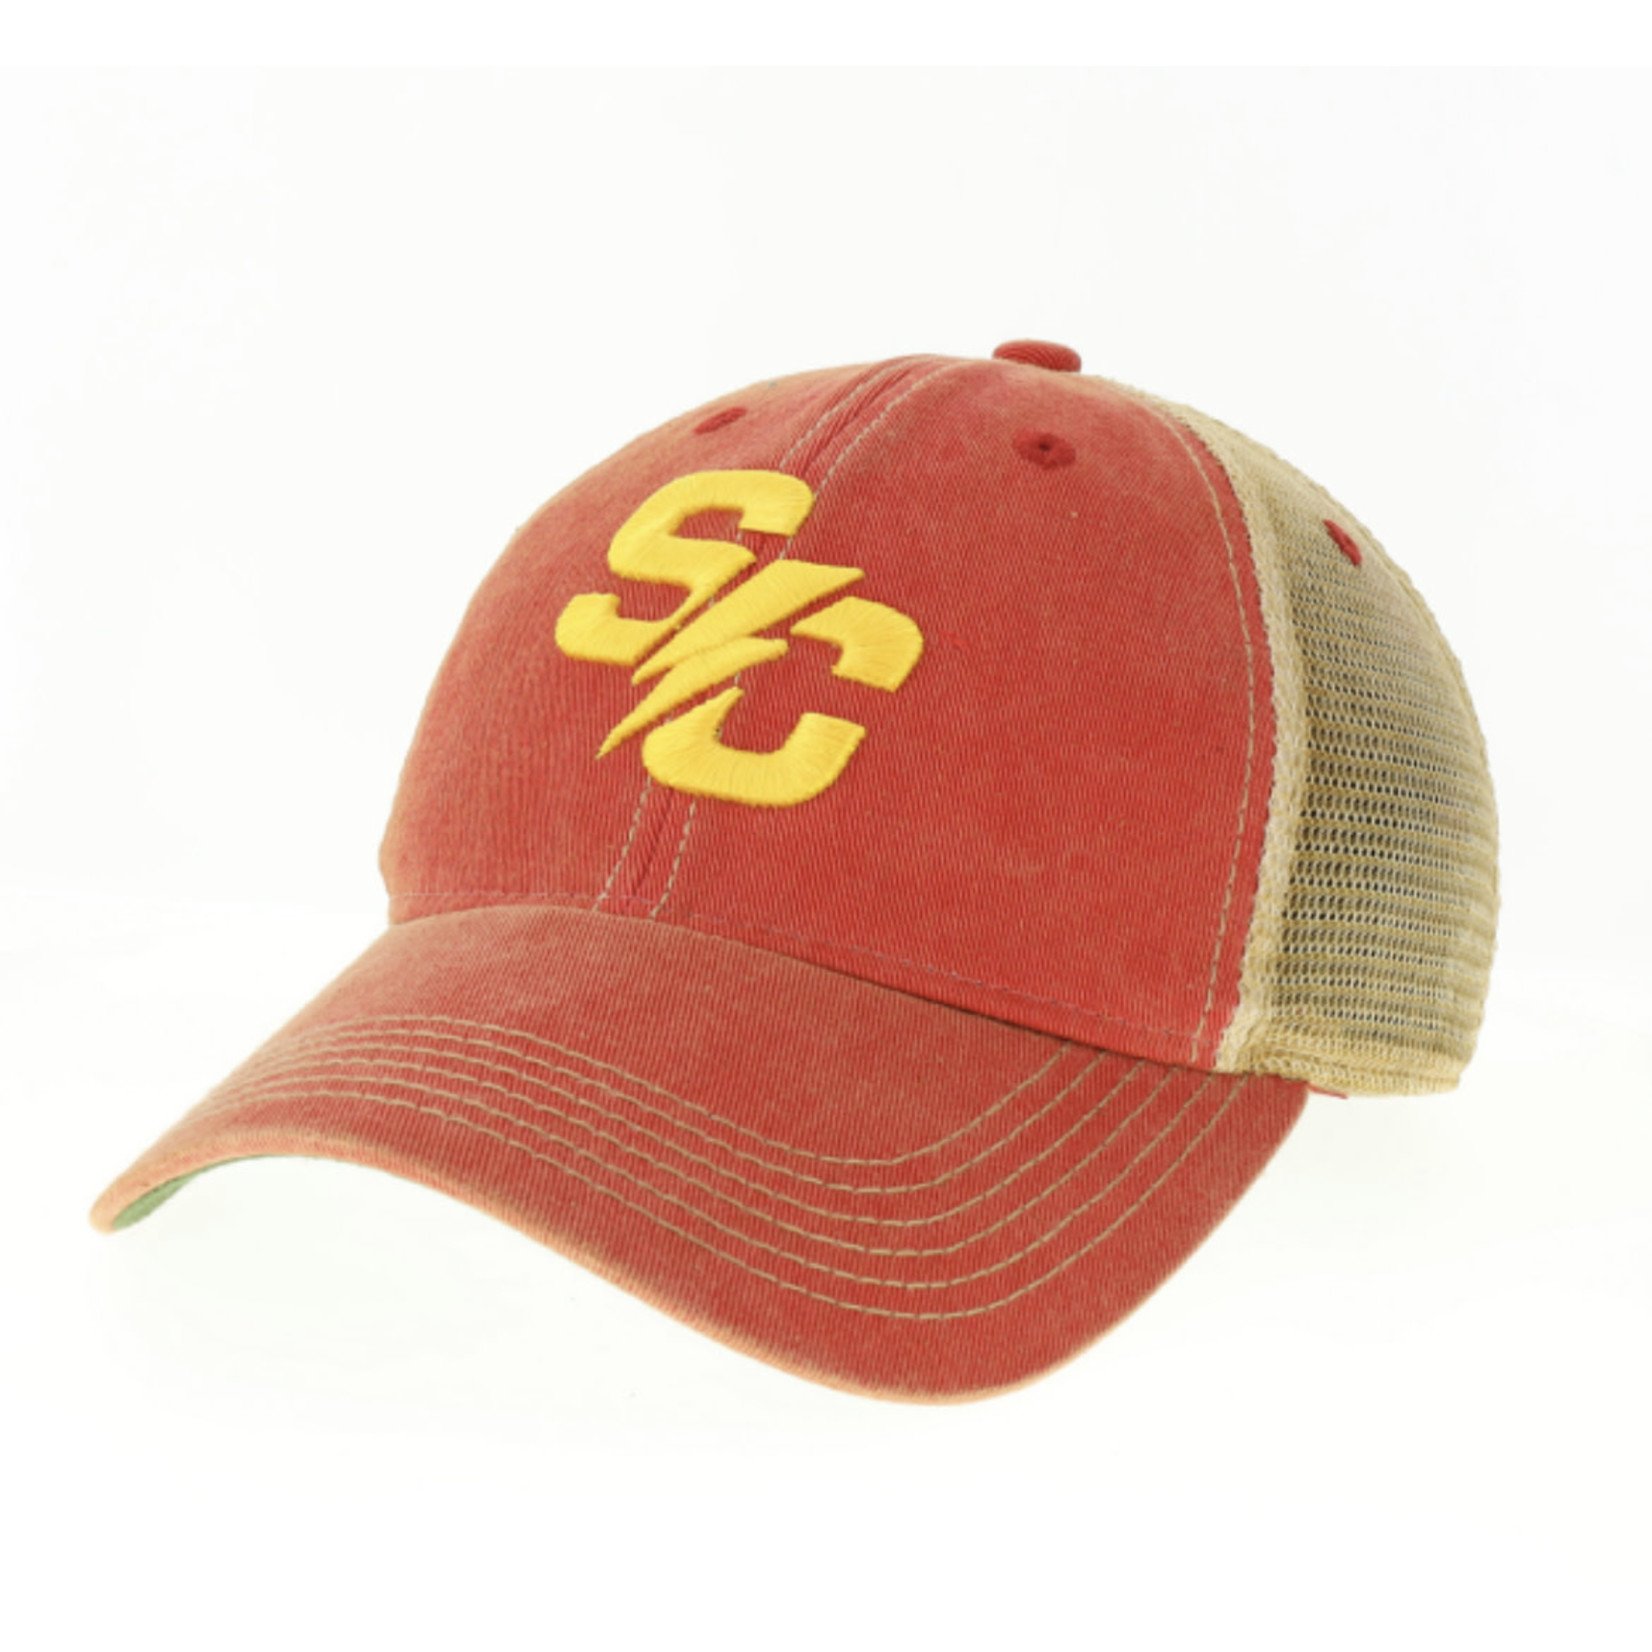 Legacy Rustic Red Trucker - Youth